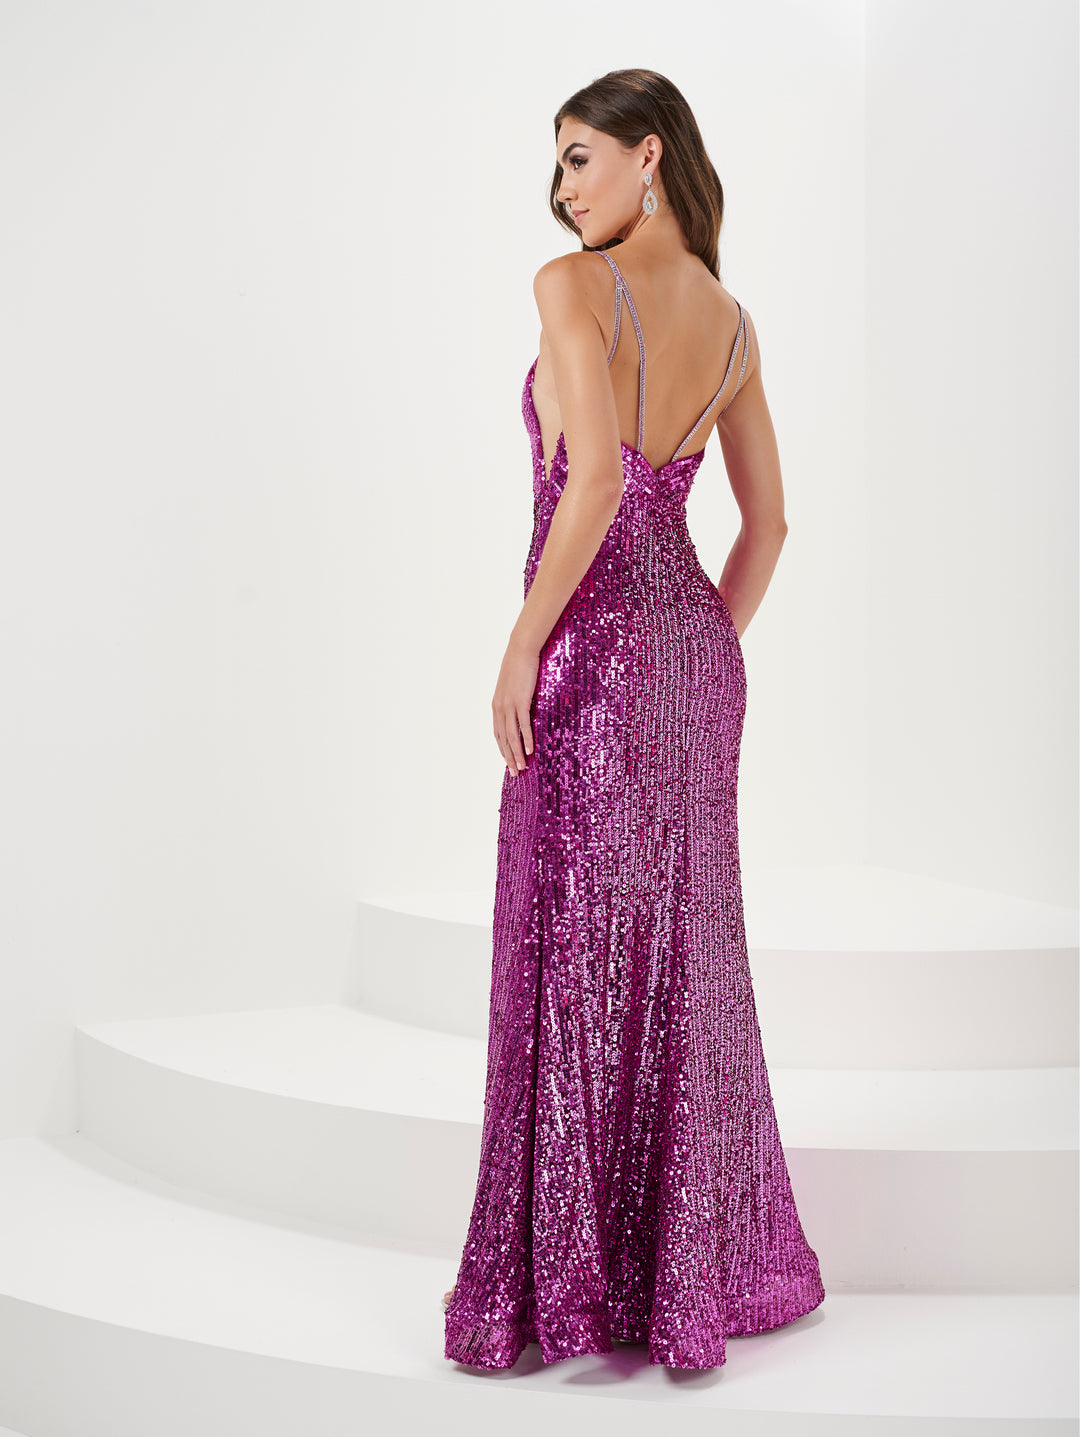 Fitted Linear Sequin V-Neck Slit Gown by Panoply 14171